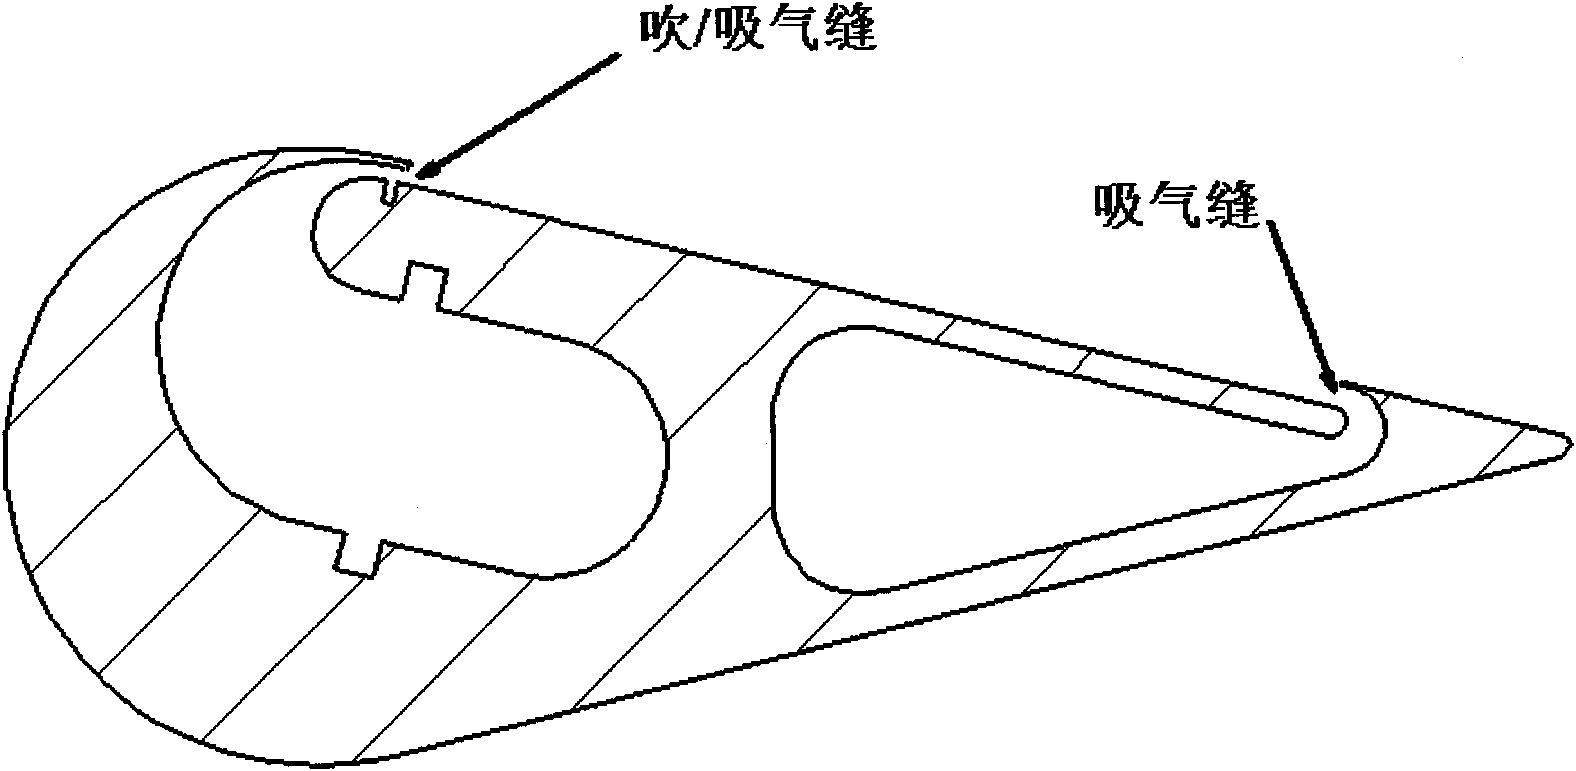 Blow/suction control method of flow separation on control surface of airplane